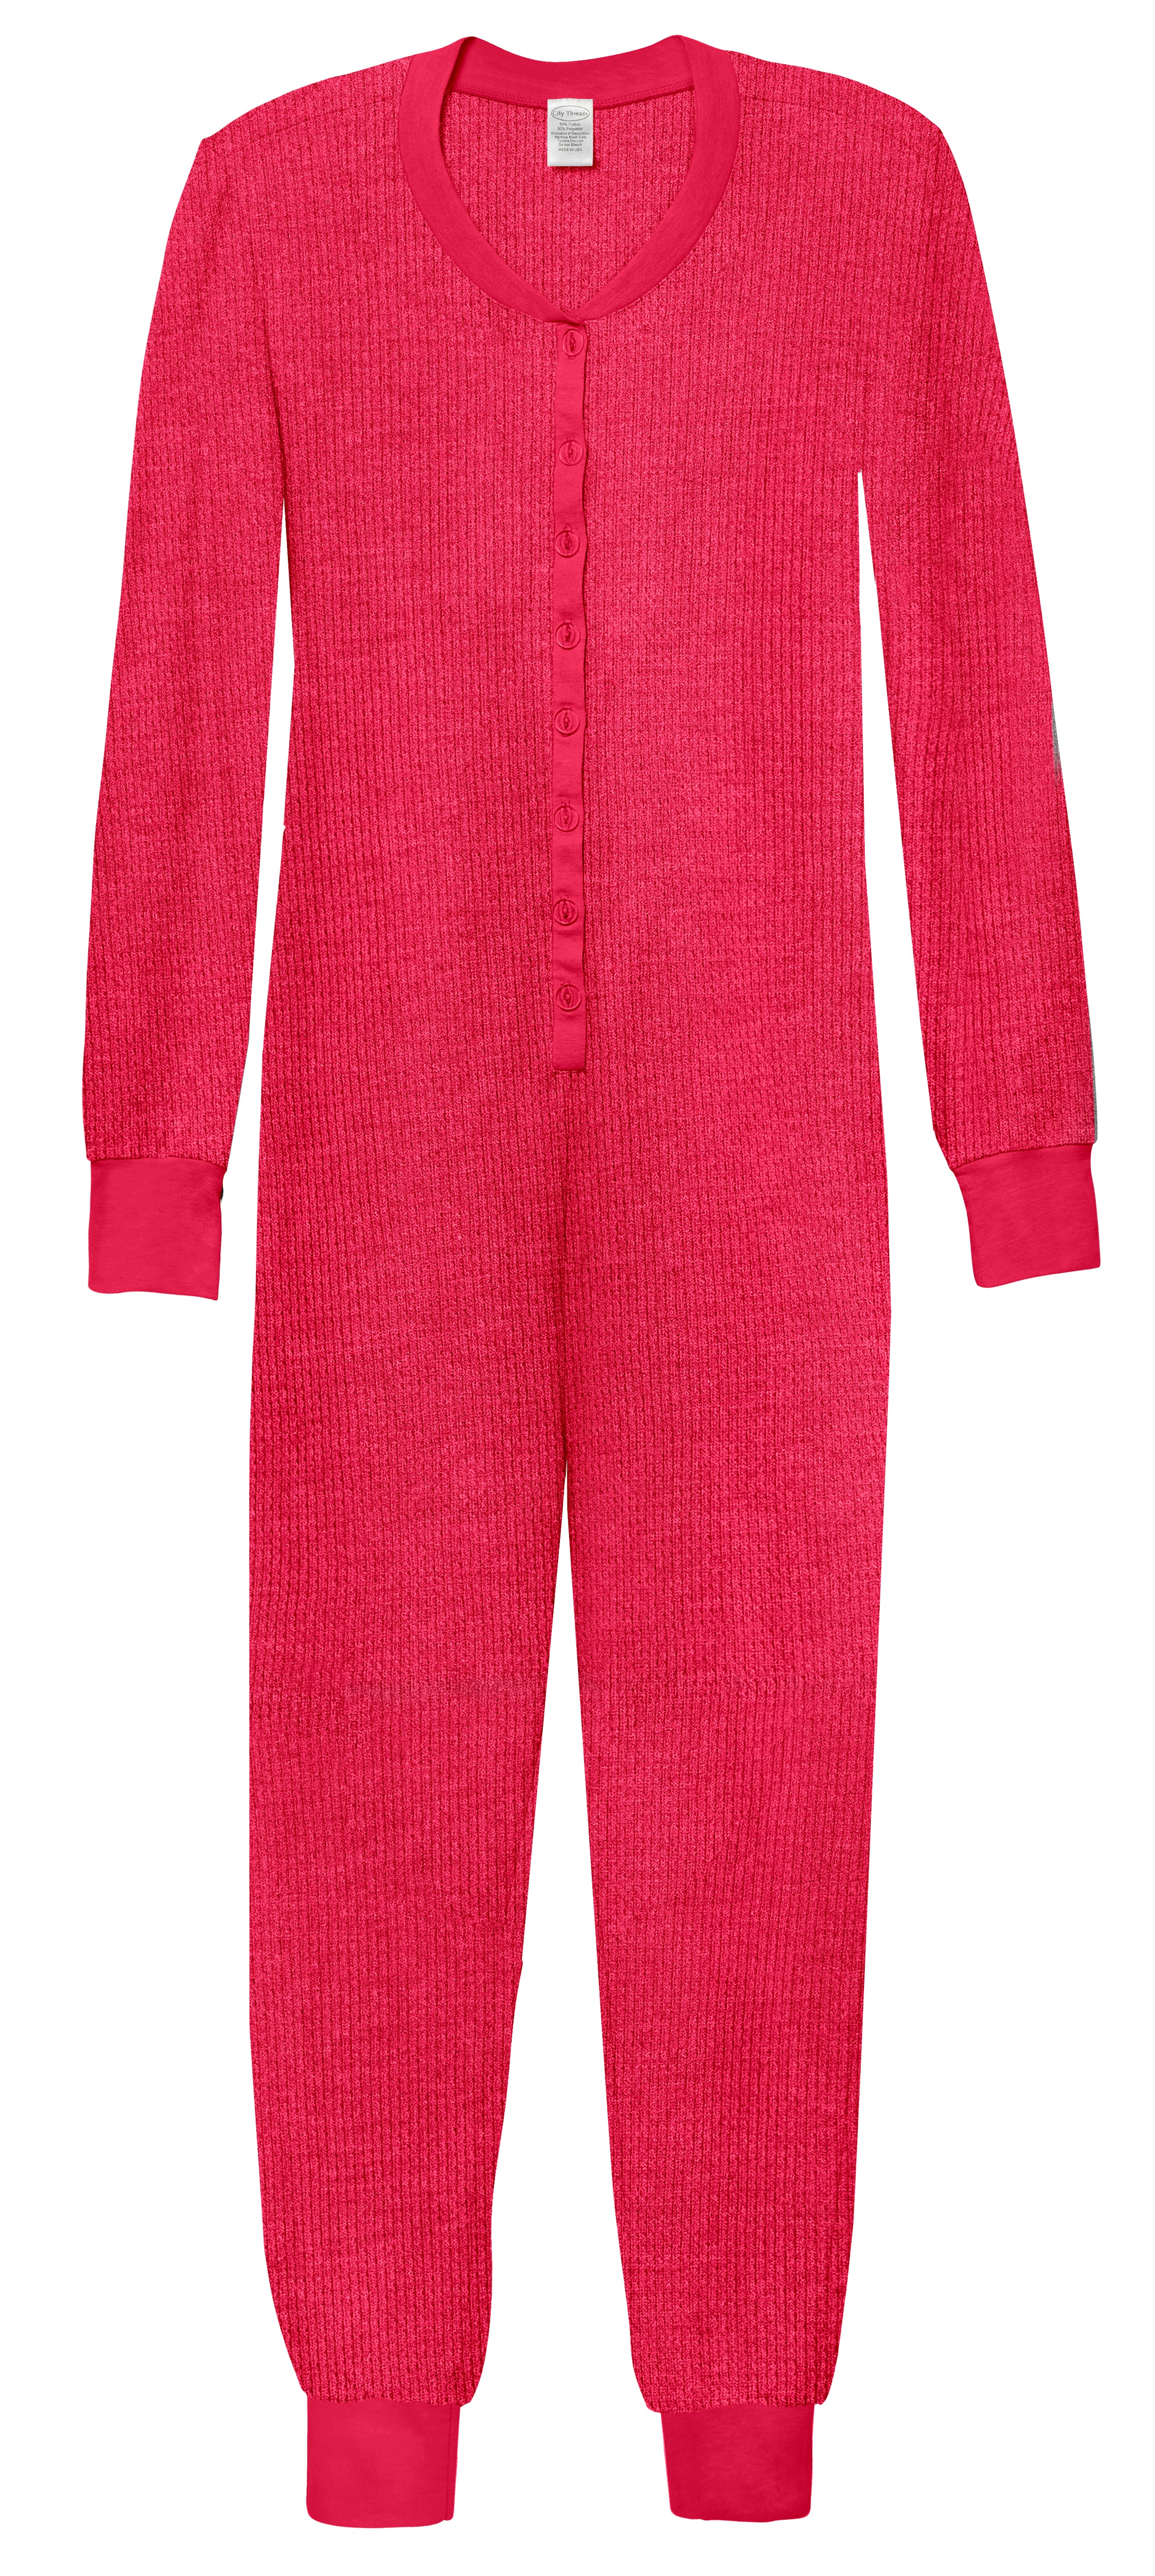 Women's Thermal Union Suit - City Threads